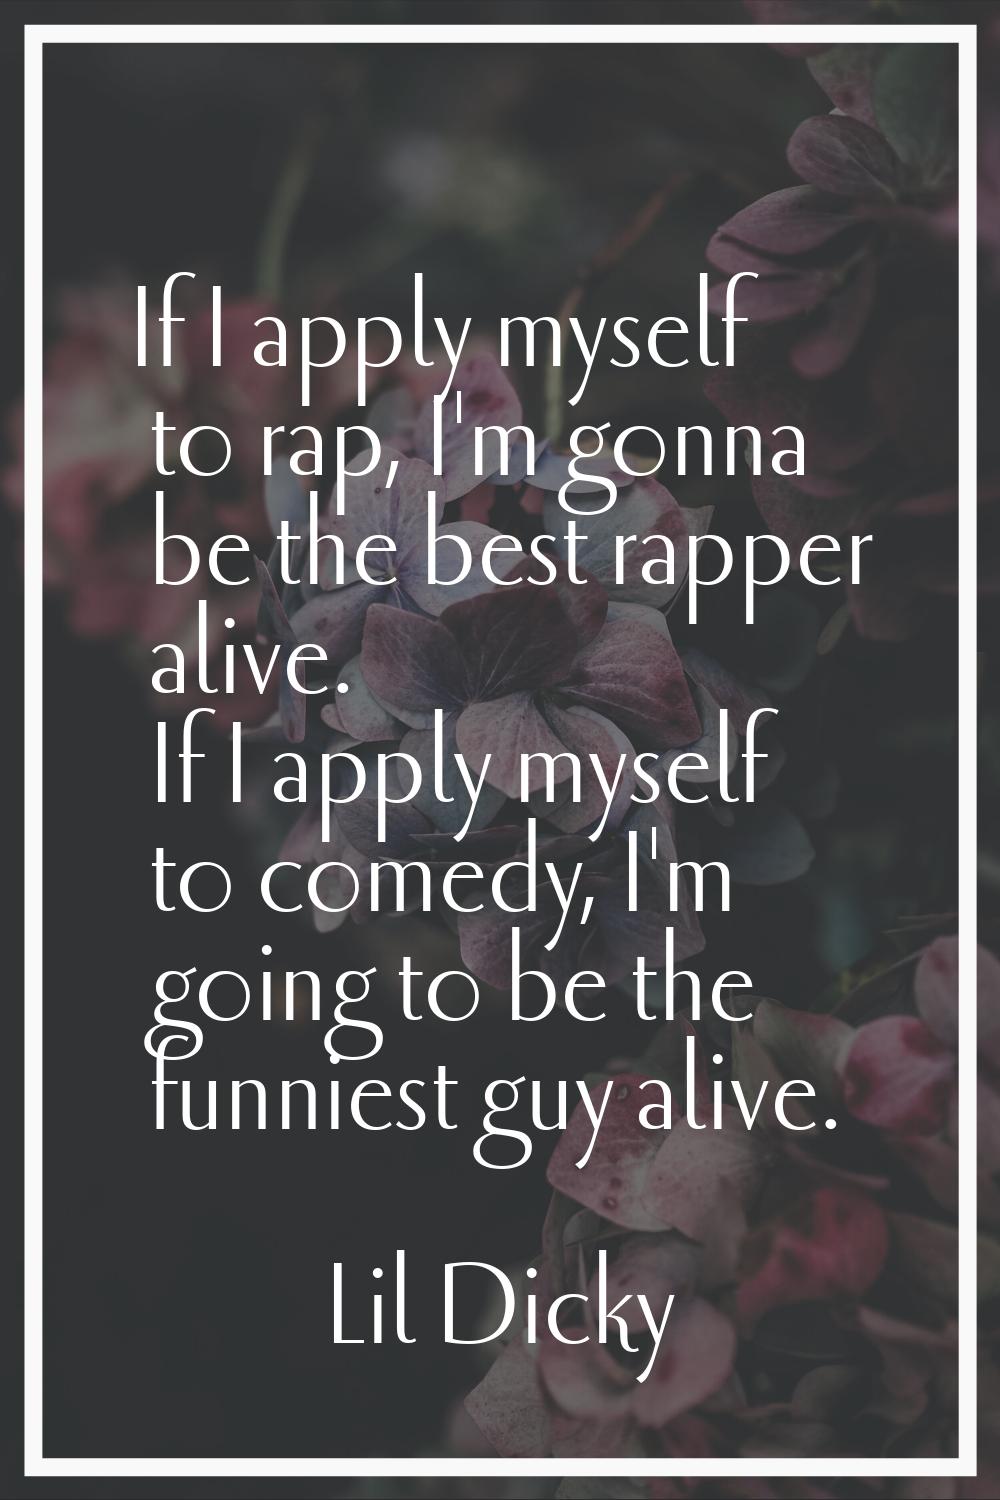 If I apply myself to rap, I'm gonna be the best rapper alive. If I apply myself to comedy, I'm goin